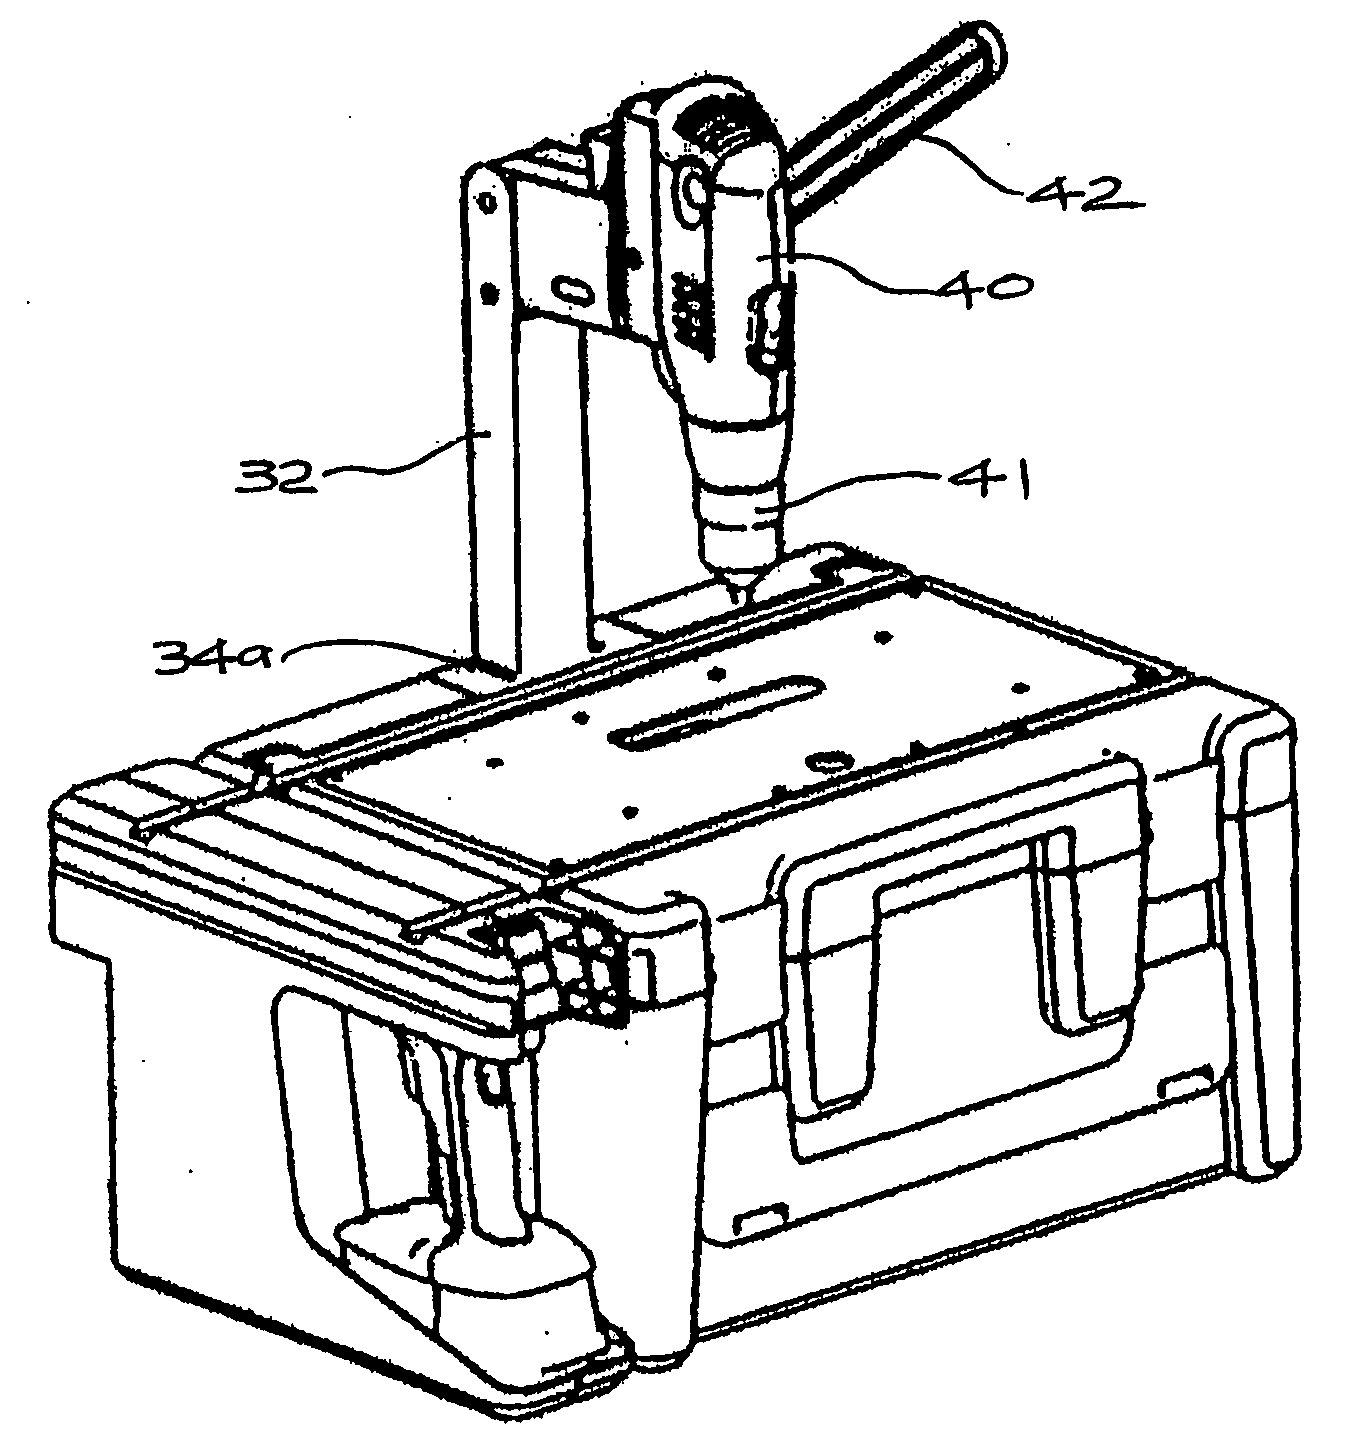 Toolbox apparatus to which power tools may be mounted to provide a workstation